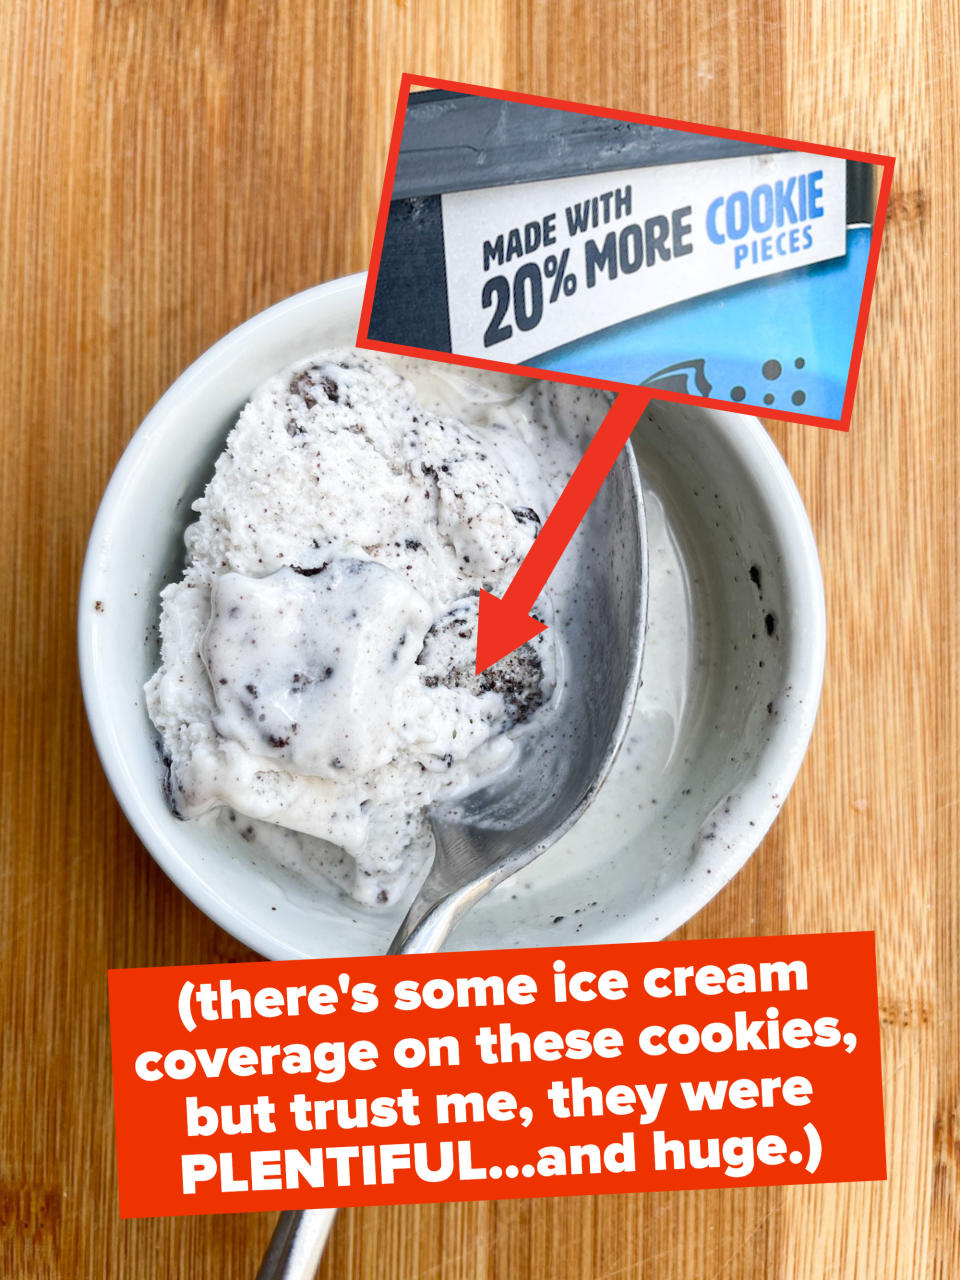 A pint of ice cream with text that says, "(there's some ice cream coverage on these cookies, but trust me, they were PLENTIFUL...and huge.)"